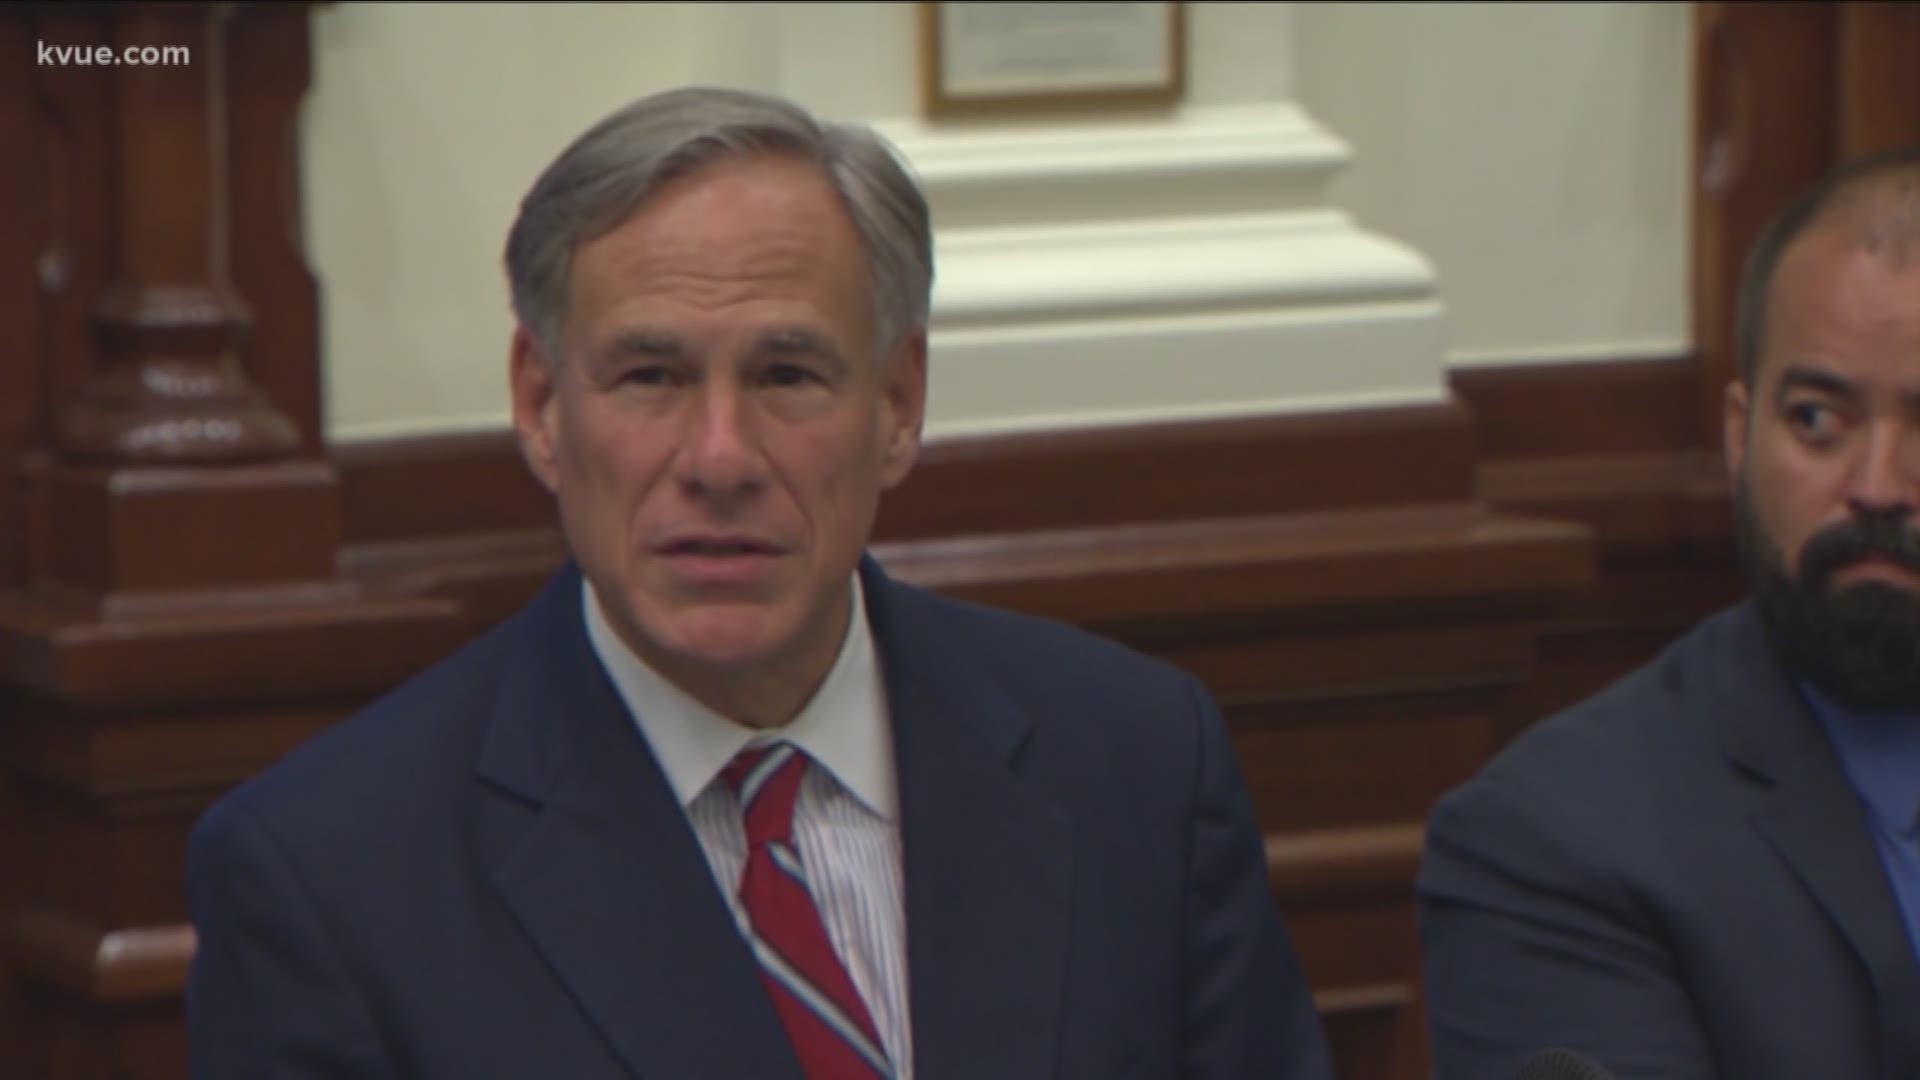 Texas leaders are on a mission to stop gun violence and domestic terrorism in the Lone Star State.